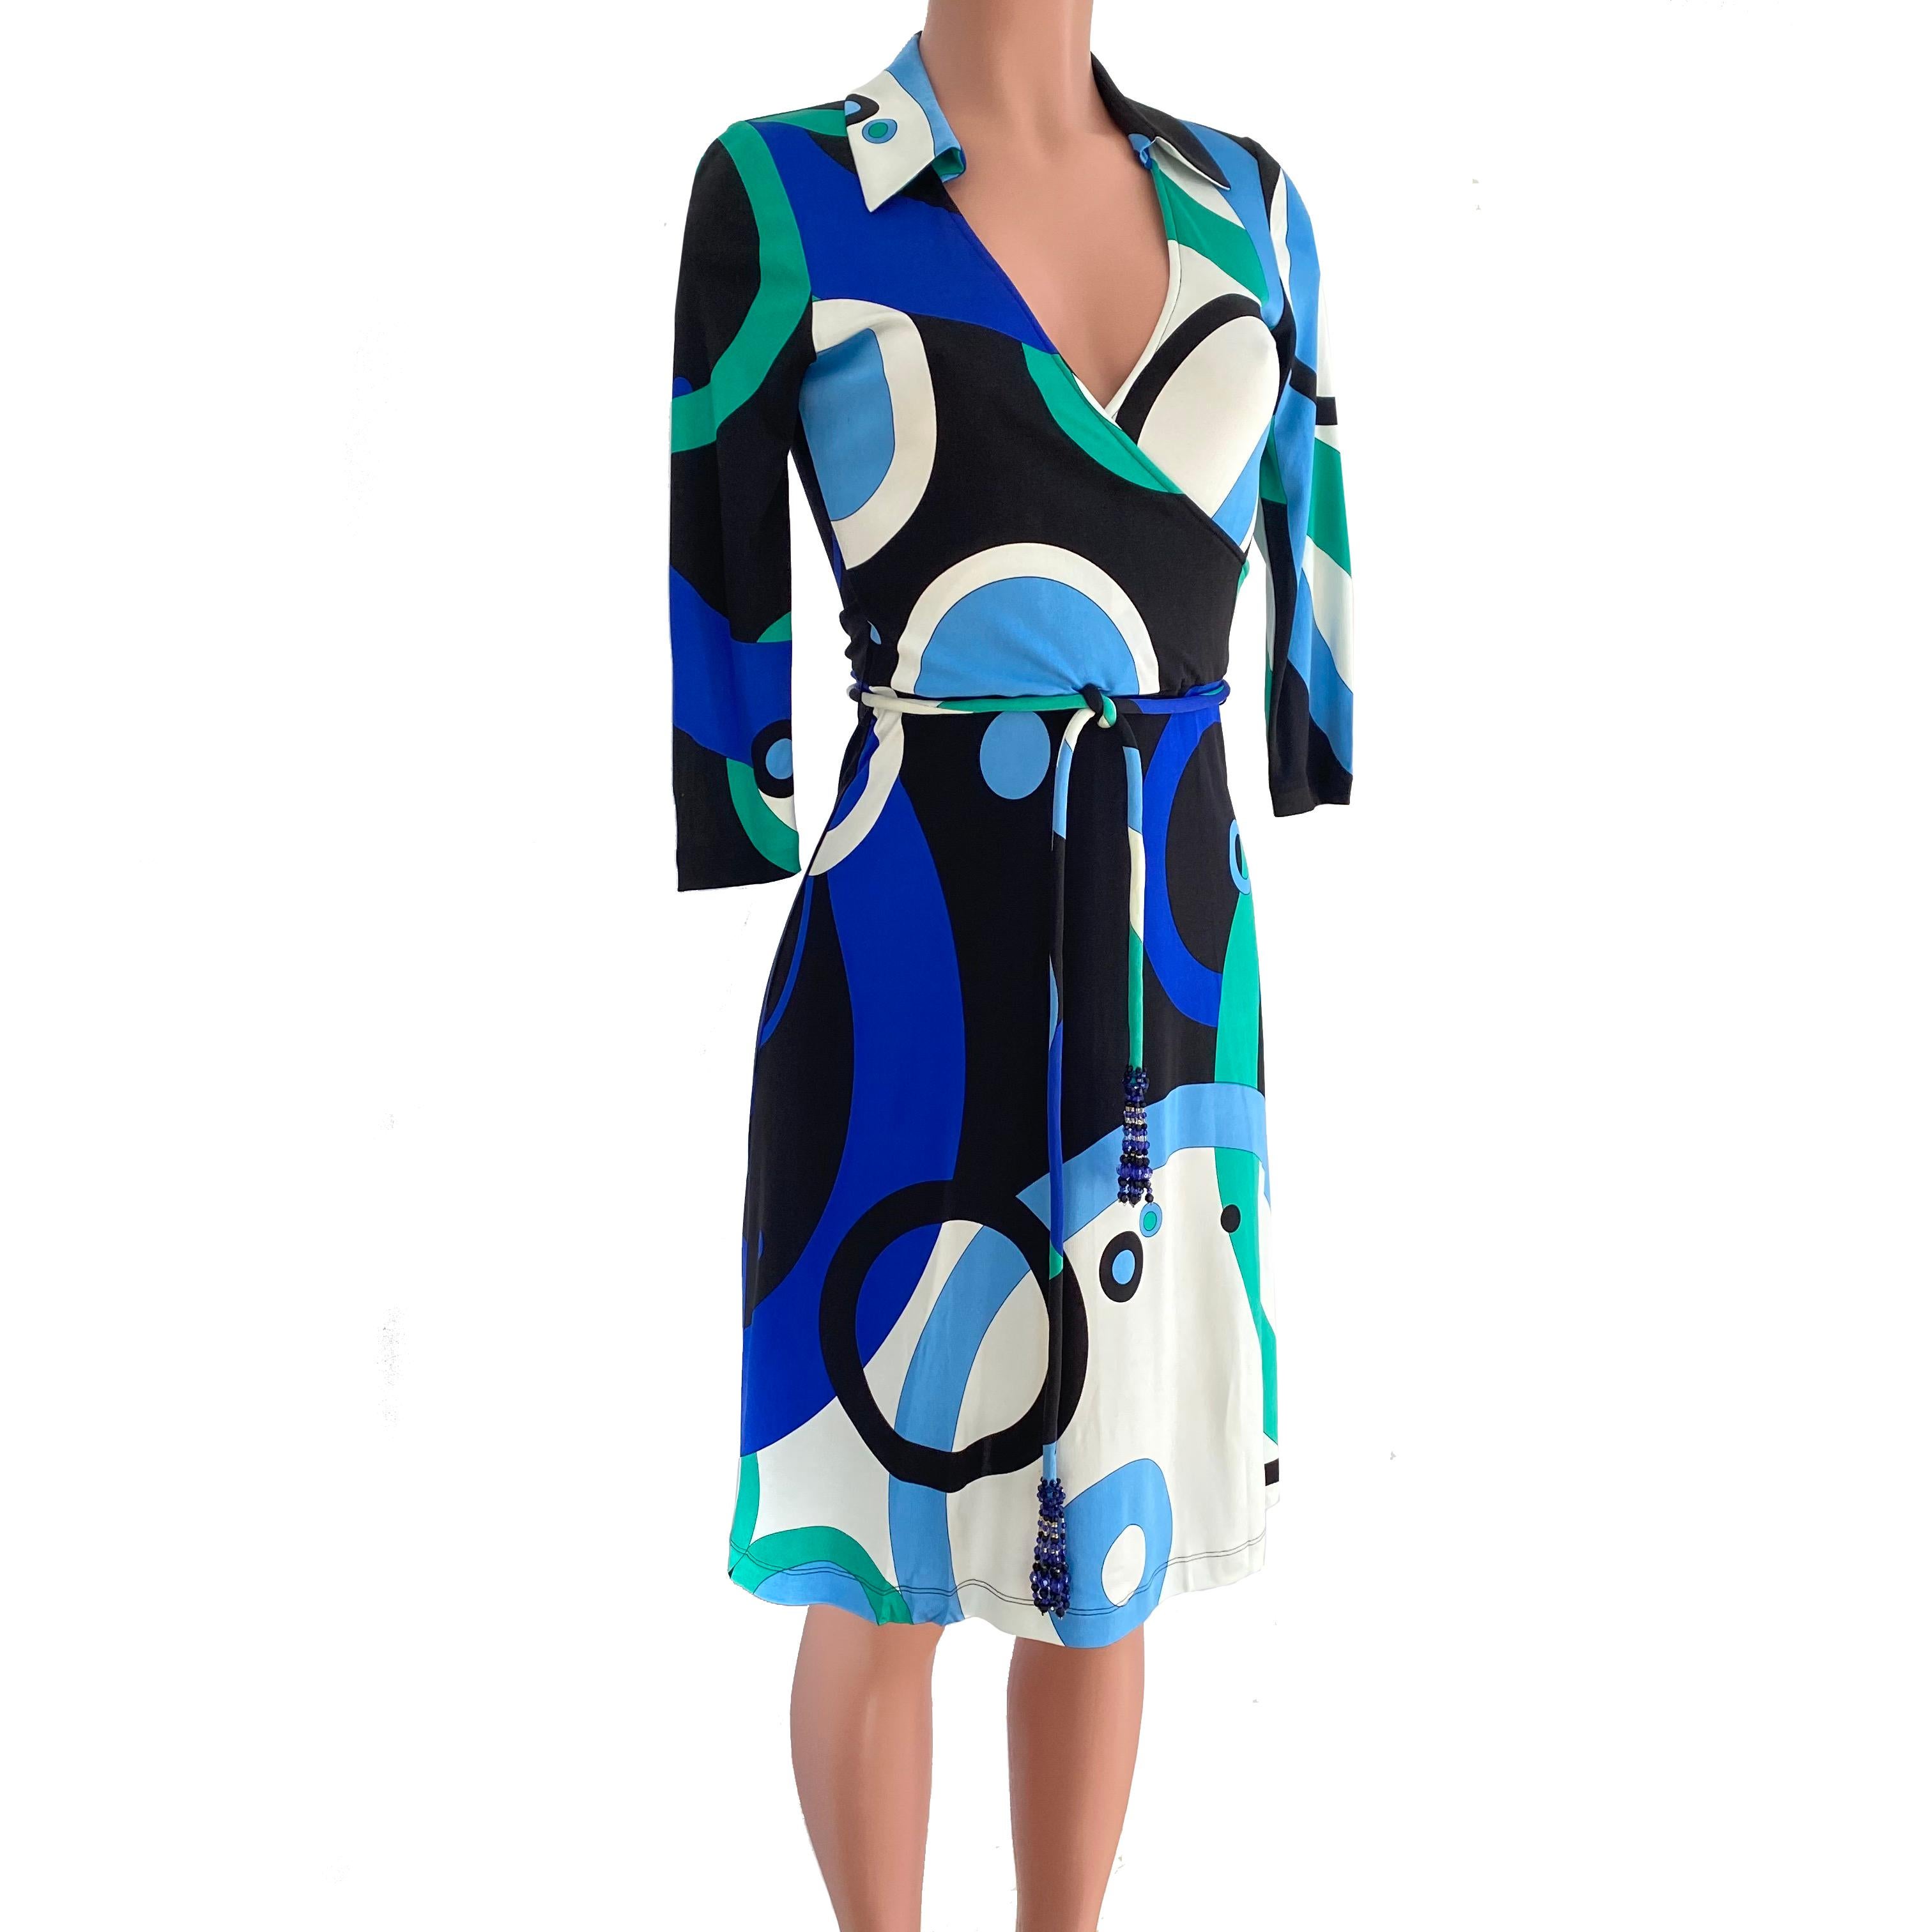 Mock wrap Shirt-collar dress with A-line skirt and 3/4 sleeves.
Original blue galaxy print from Flora Kung.
Detachable cord belt with blue beads–can be switched to a day belt for a more casual look.
US 10 = UK 14 = French 42
Condition: Pristine.